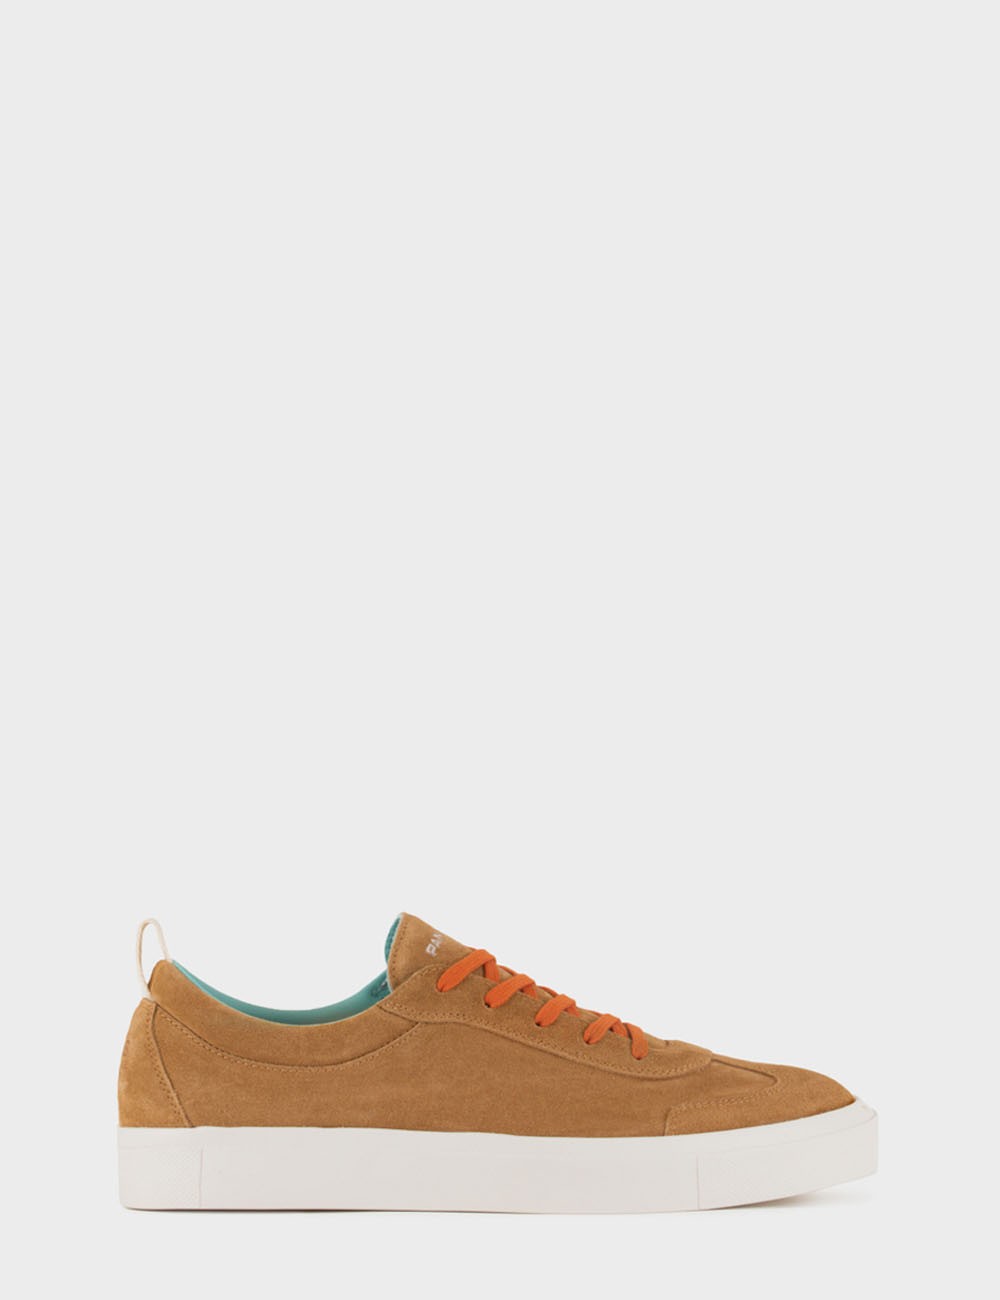 SNEAKER P08 UOMO IN SUEDE BISCOTTO